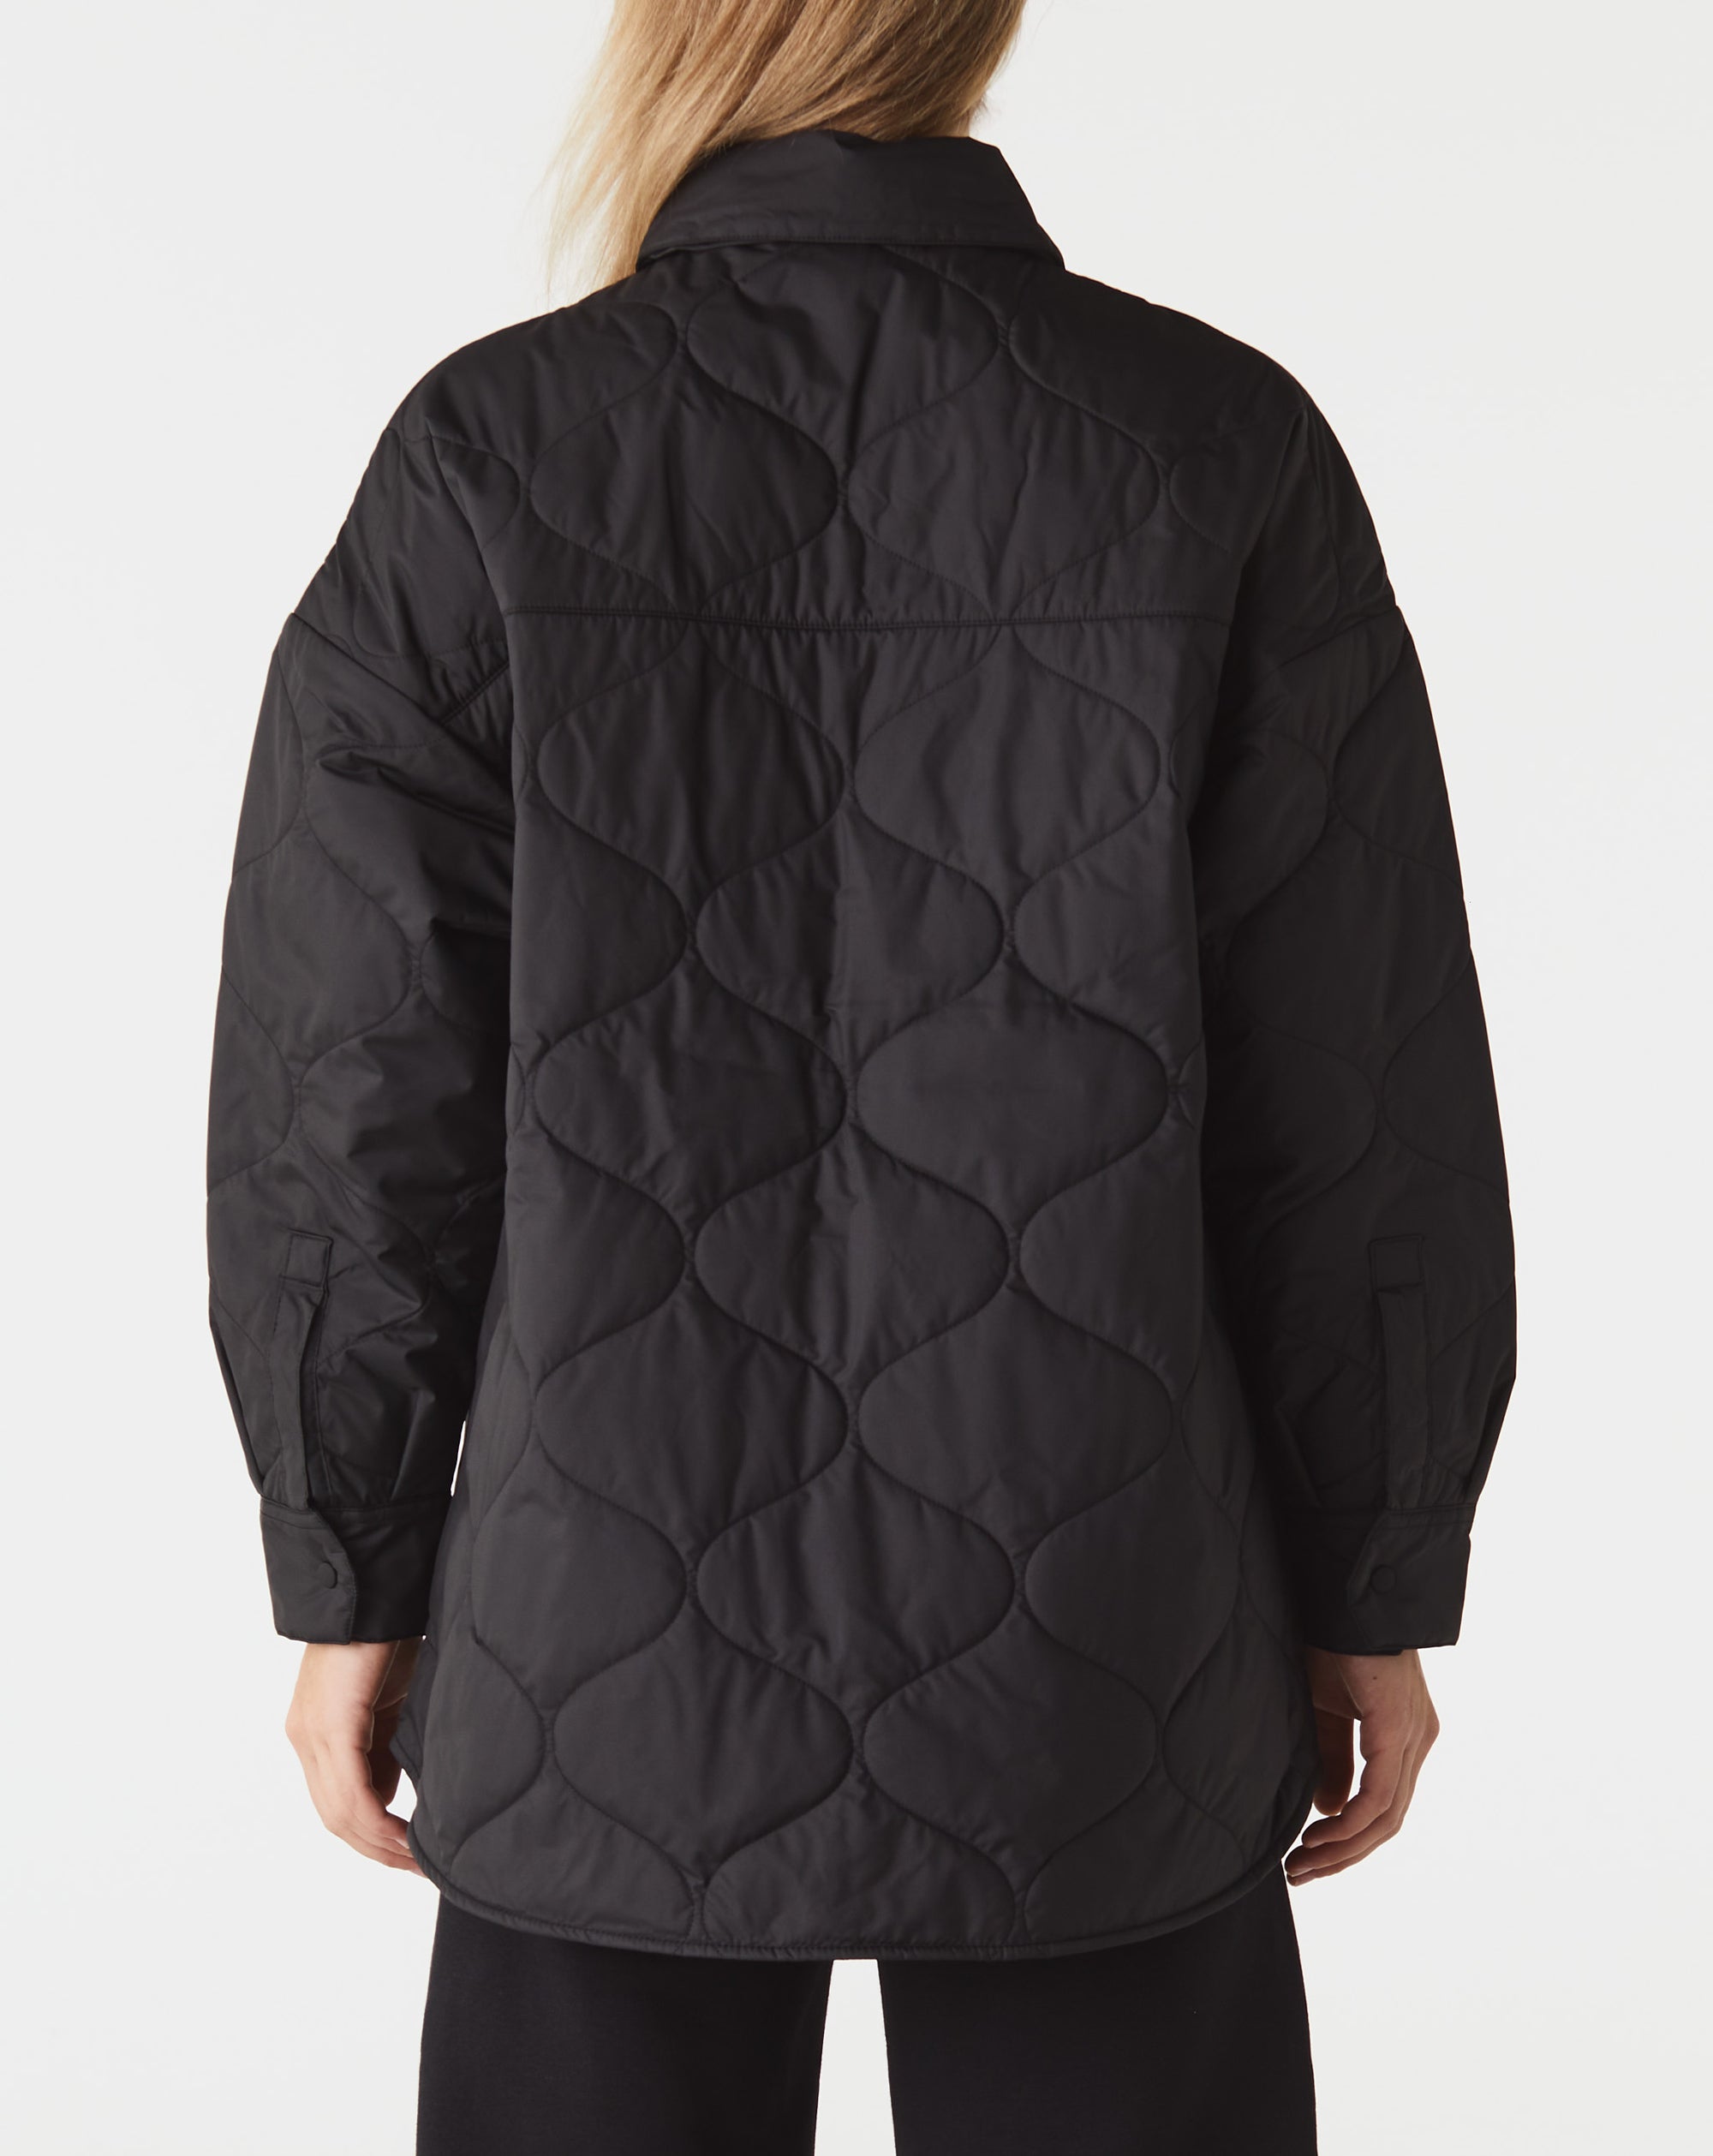 Nike Women's Quilted Trench Coat - Rule of Next Apparel